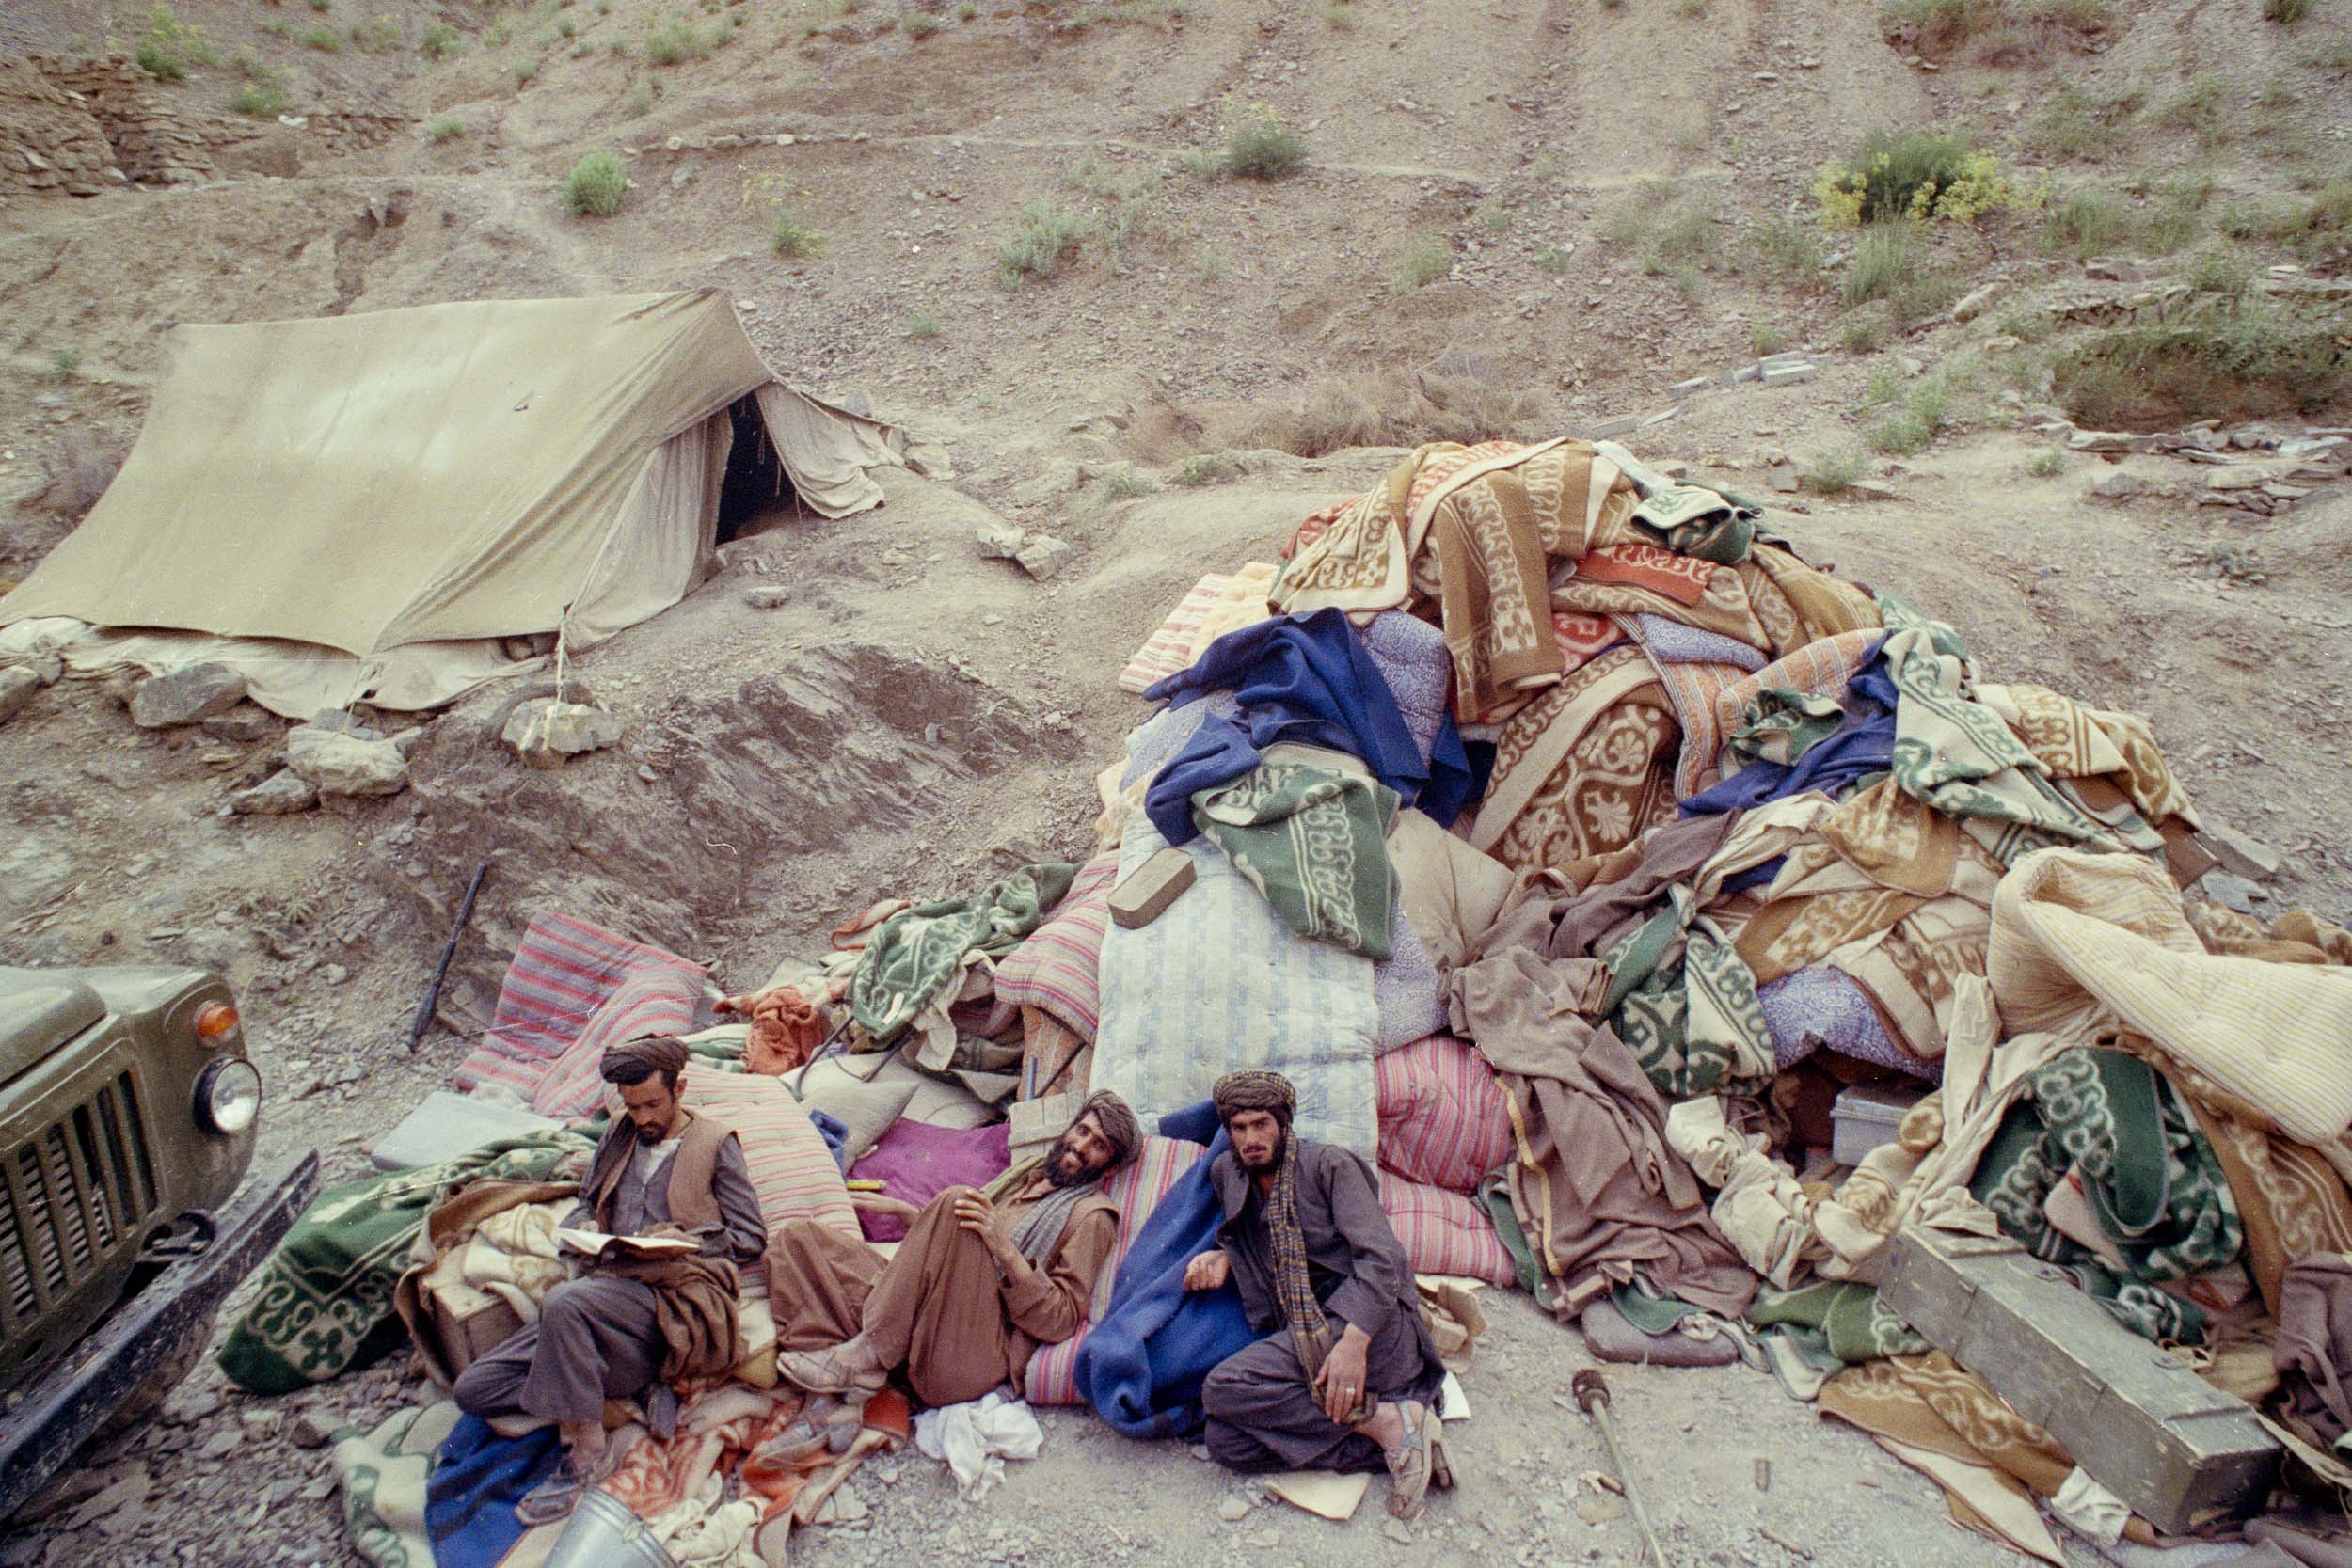 Mujahideen relax on surrendered mattresses in a gorge,  Afghanistan 1988